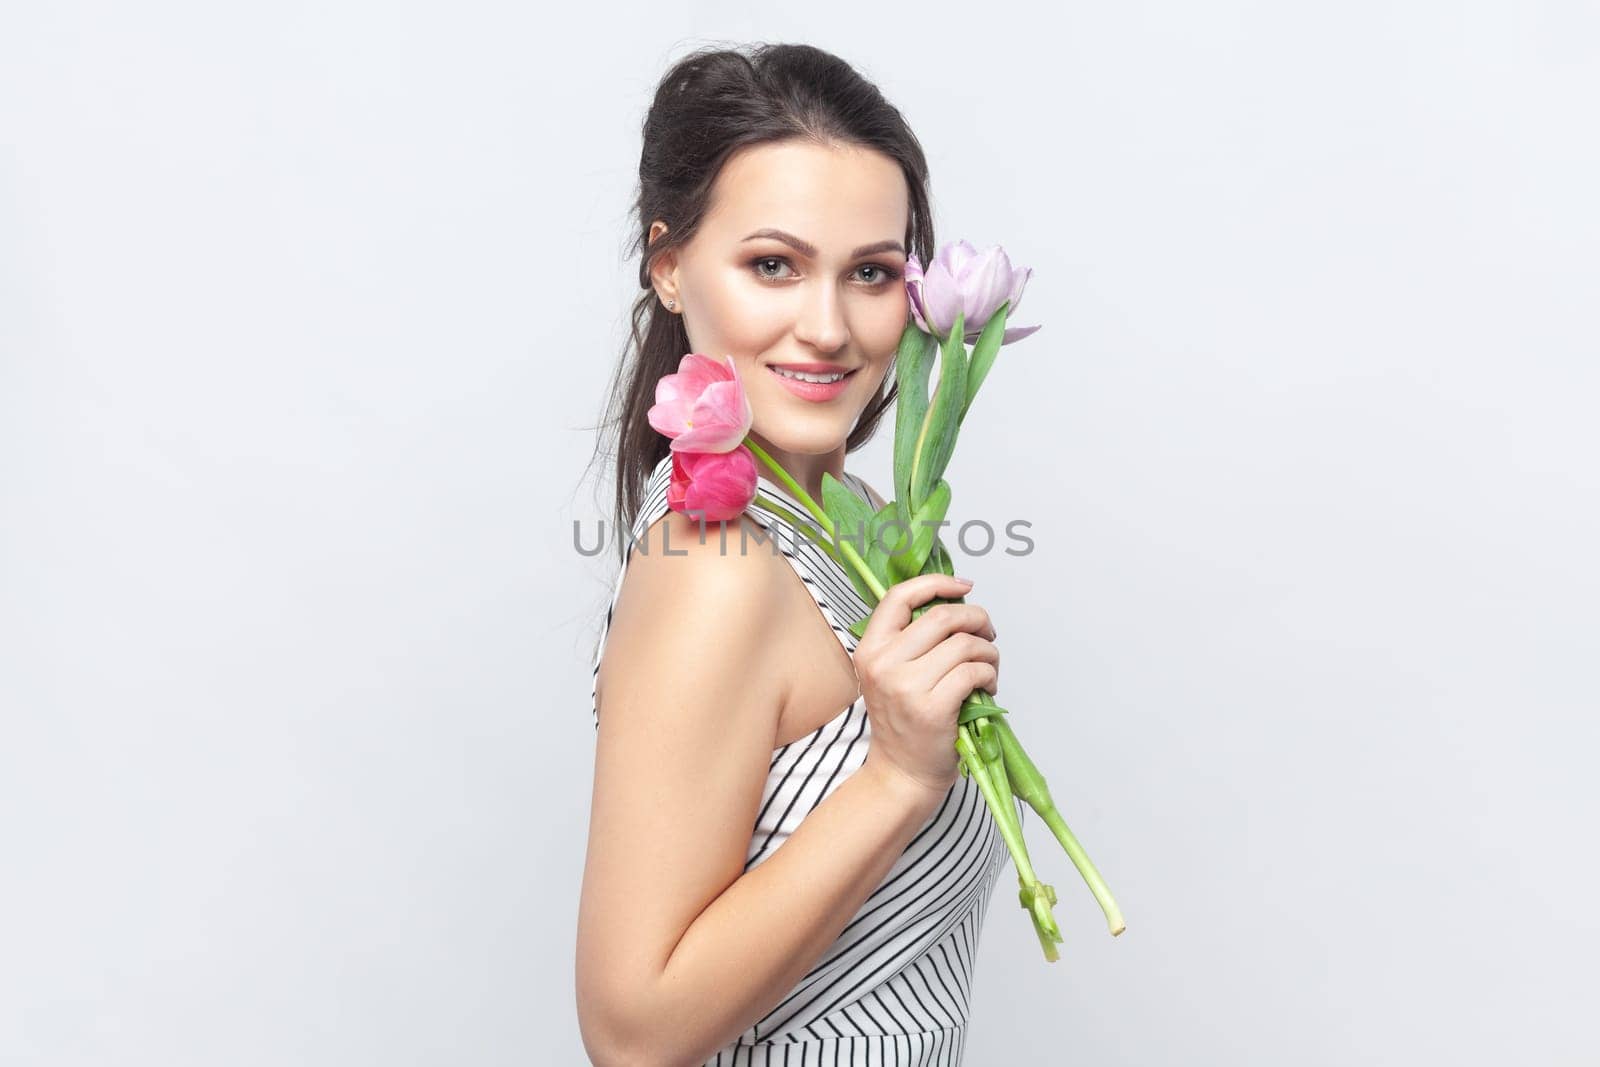 Portrait of smiling beautiful brunette woman holding bouquet of tulips, looking at camera, smiling with happiness, wearing striped dress. Indoor studio shot isolated on gray background.